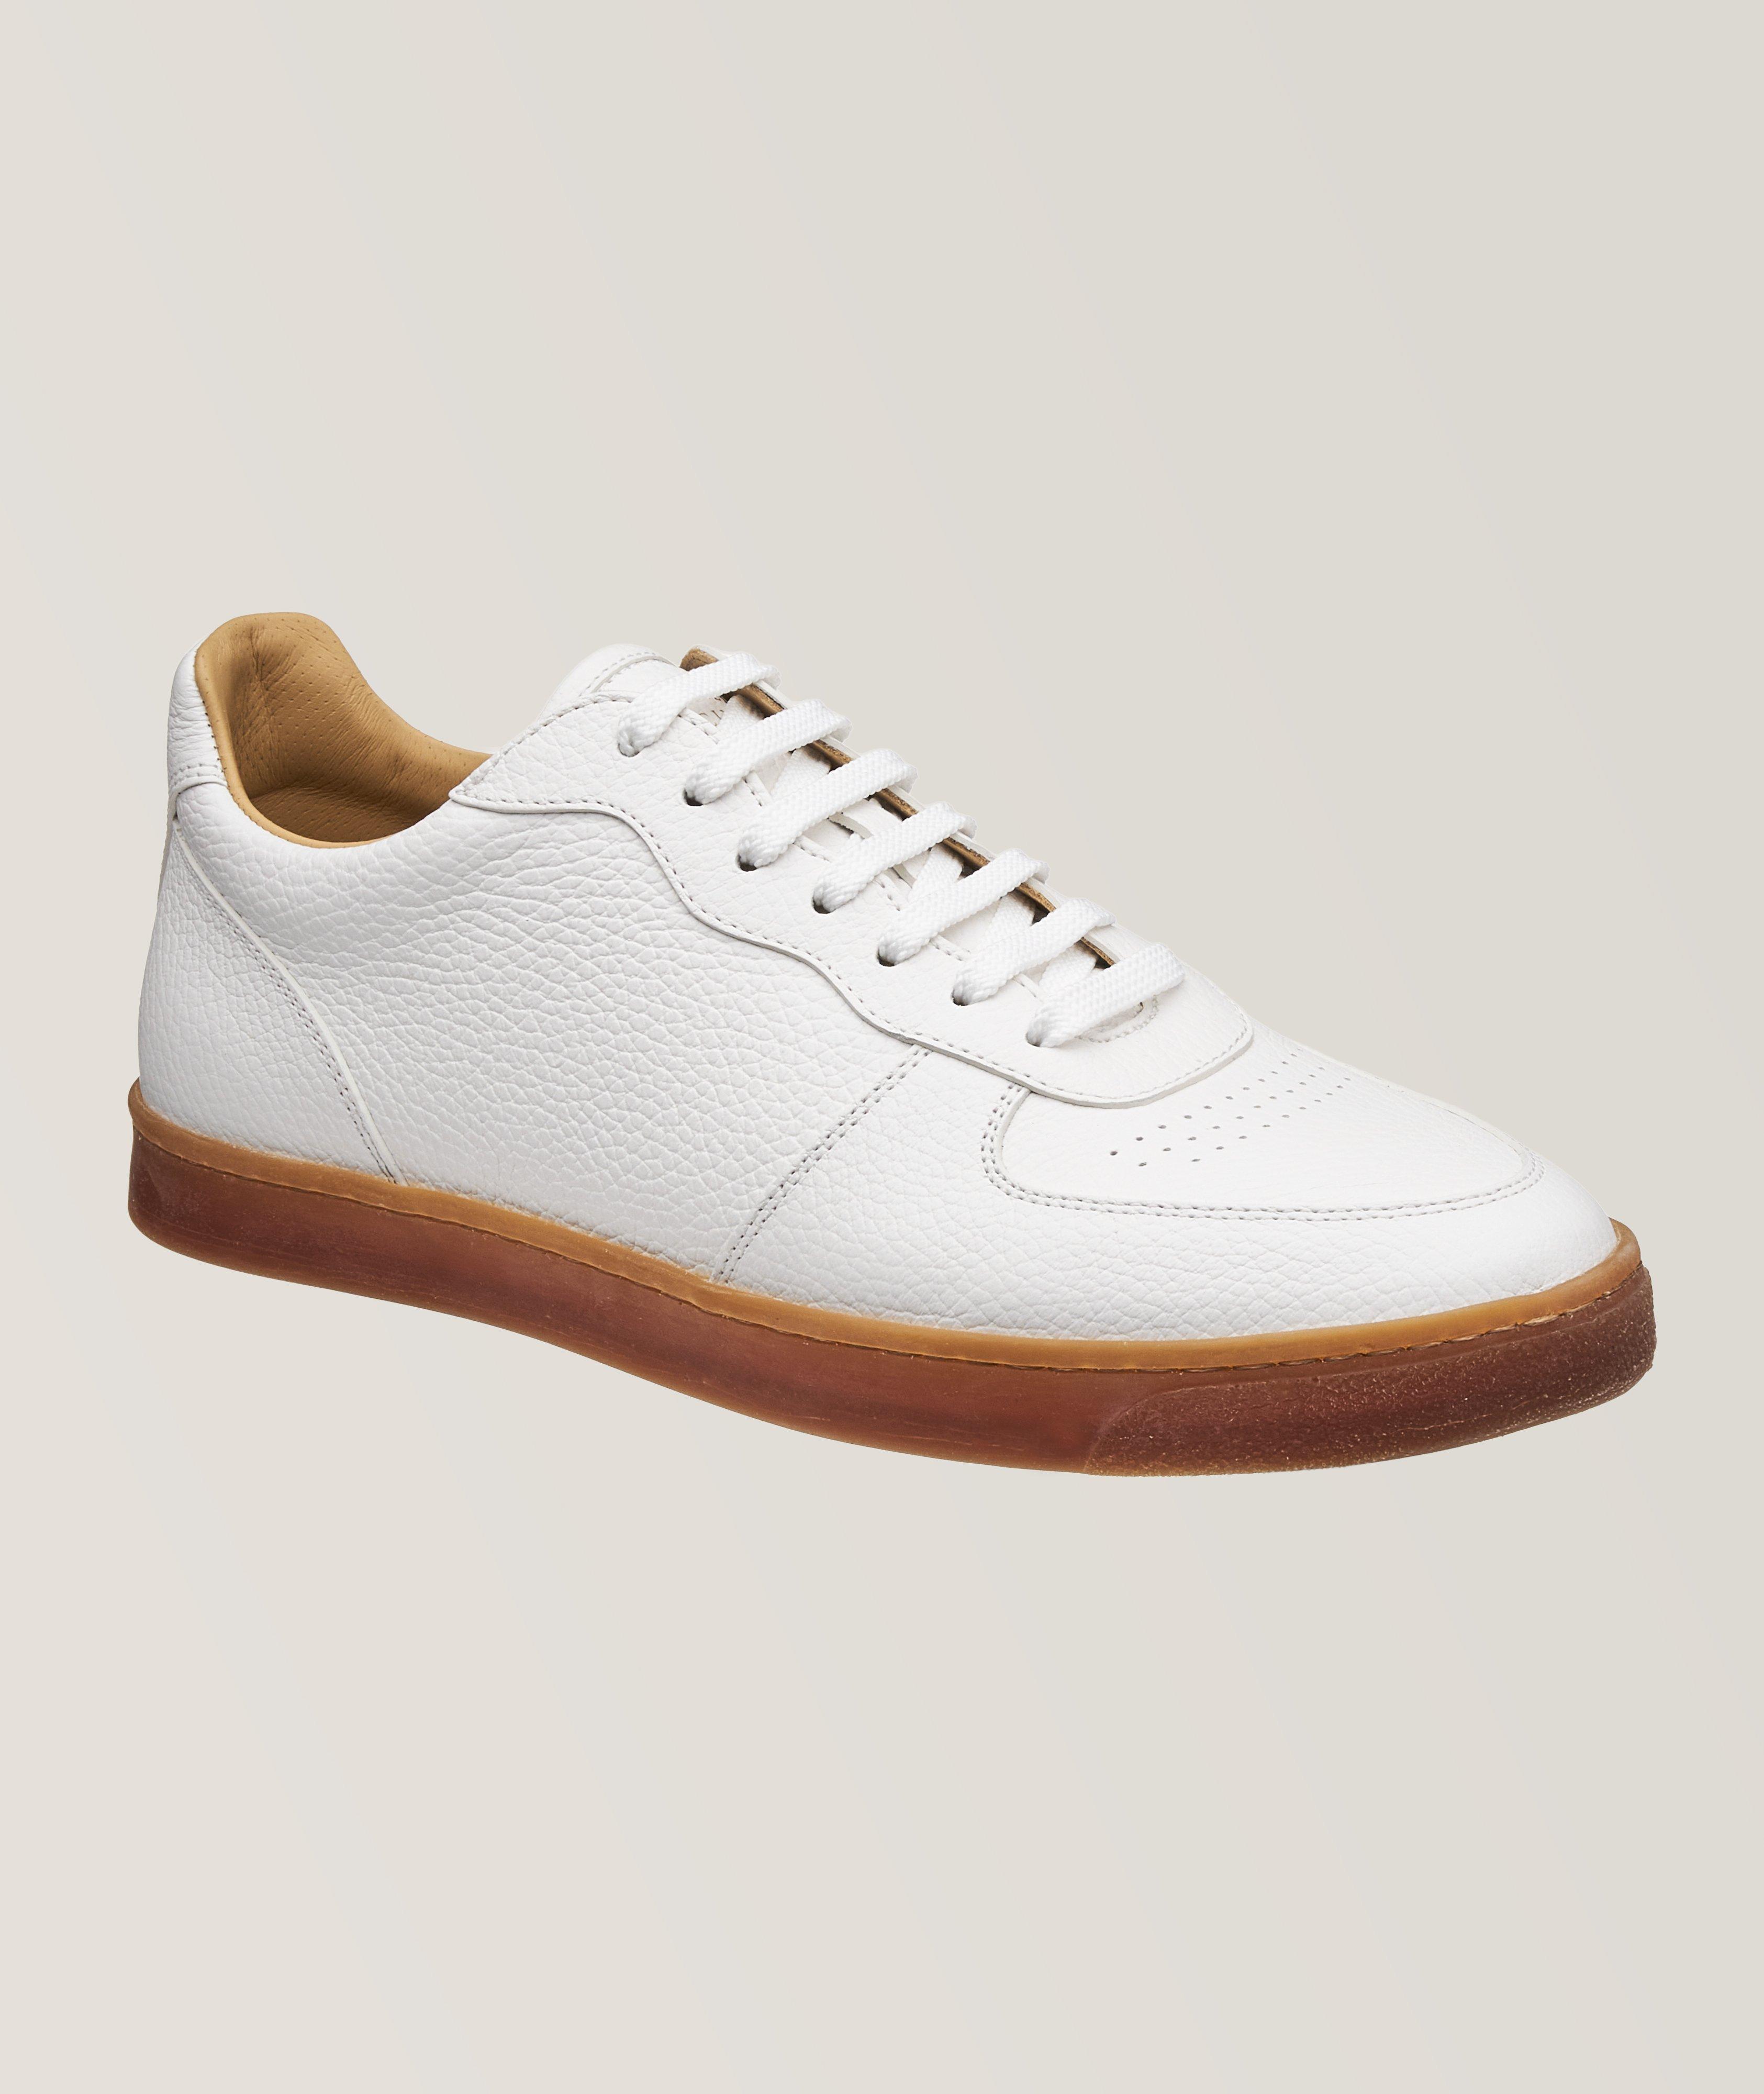 Hevea Pebbled Leather Low-Top Sneakers image 0